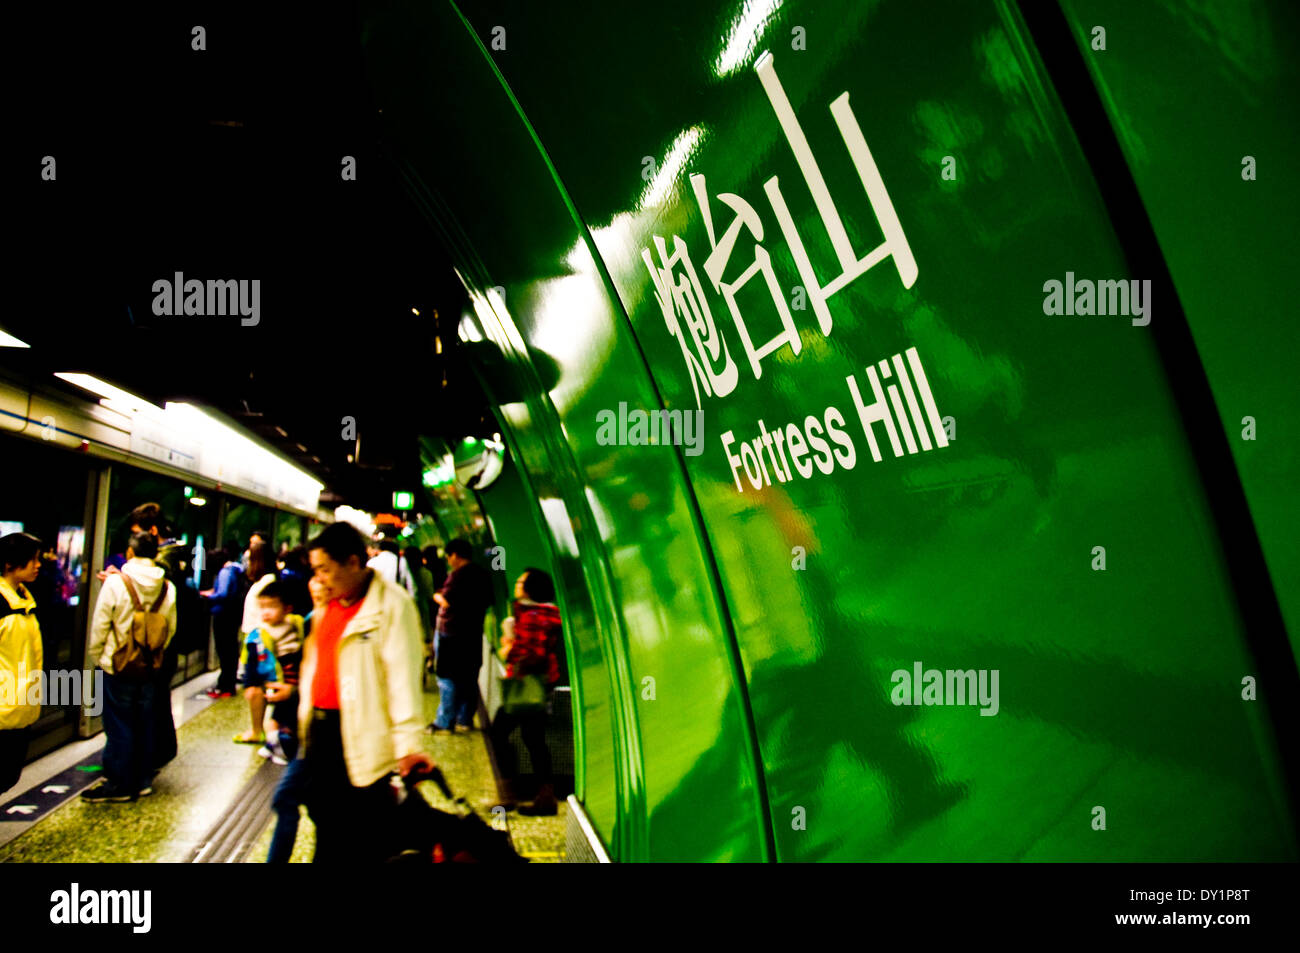 Passengers waiting to board a train at Fortress Hill station on MTR metro subway in Hong Kong Stock Photo